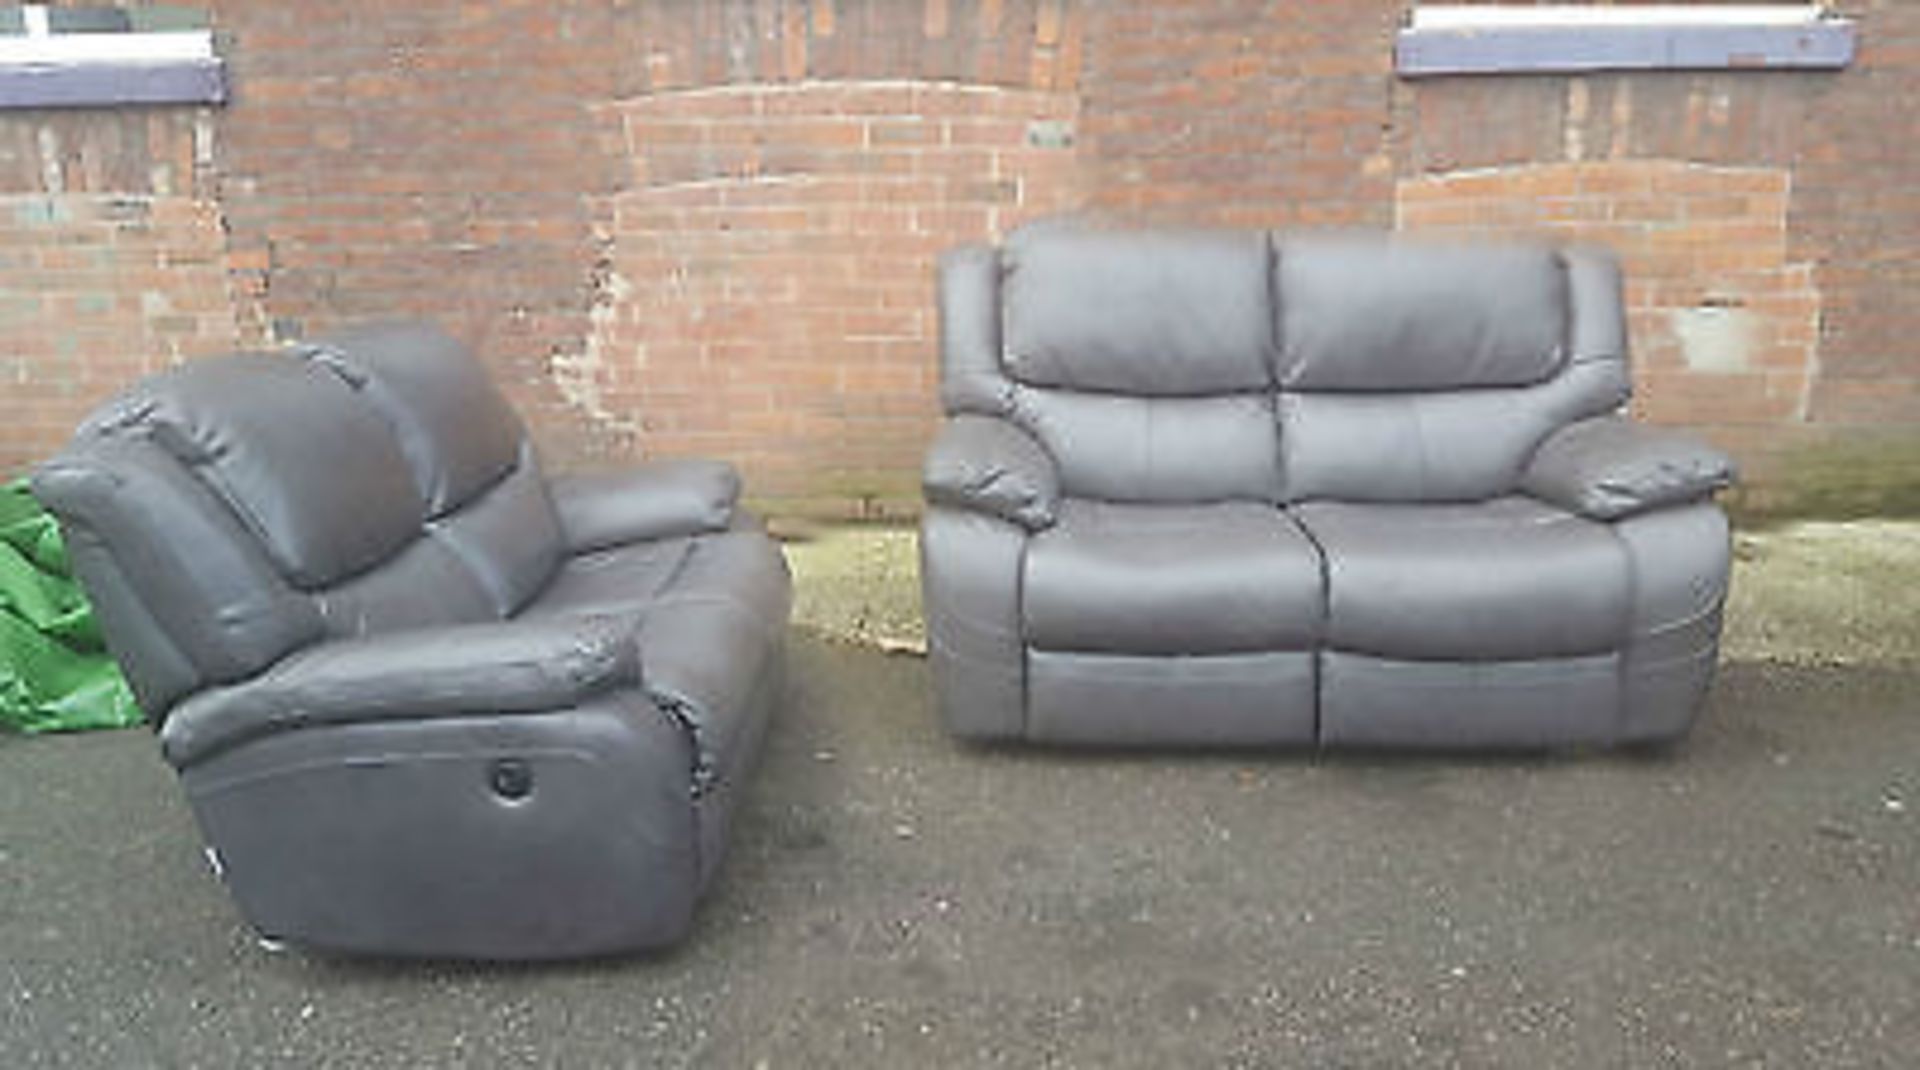 Supreme Valance graphite grey leather 2 seater plus 2 seater reclining sofas - Image 2 of 2